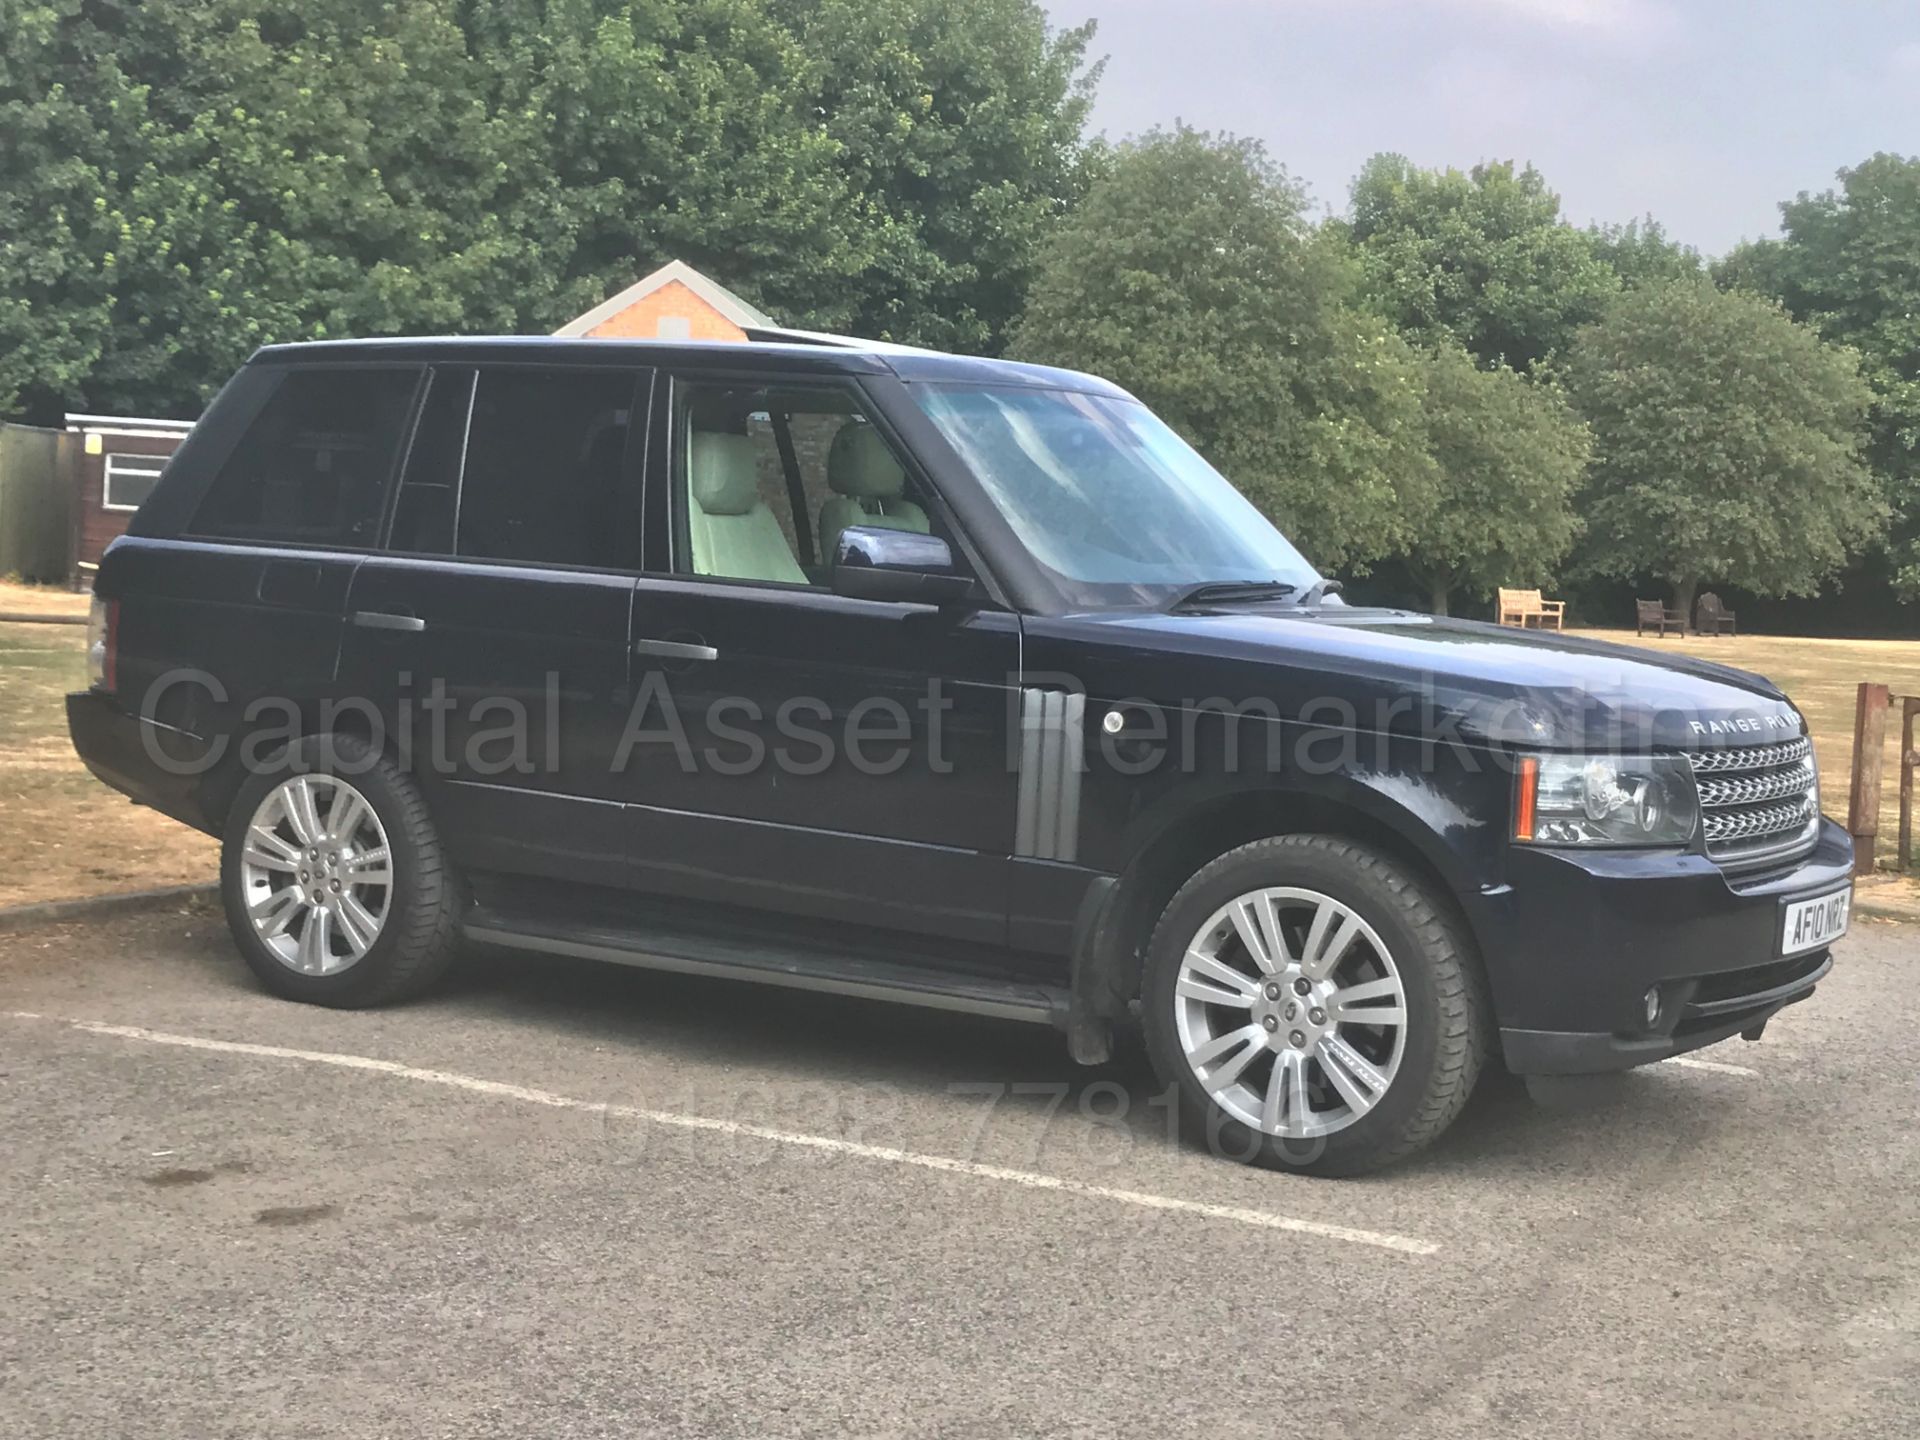 RANGE ROVER VOGUE **SE EDITION** (2010 - FACELIFT EDITION) 'TDV8 - 268 BHP - AUTO' **FULLY LOADED** - Image 14 of 62